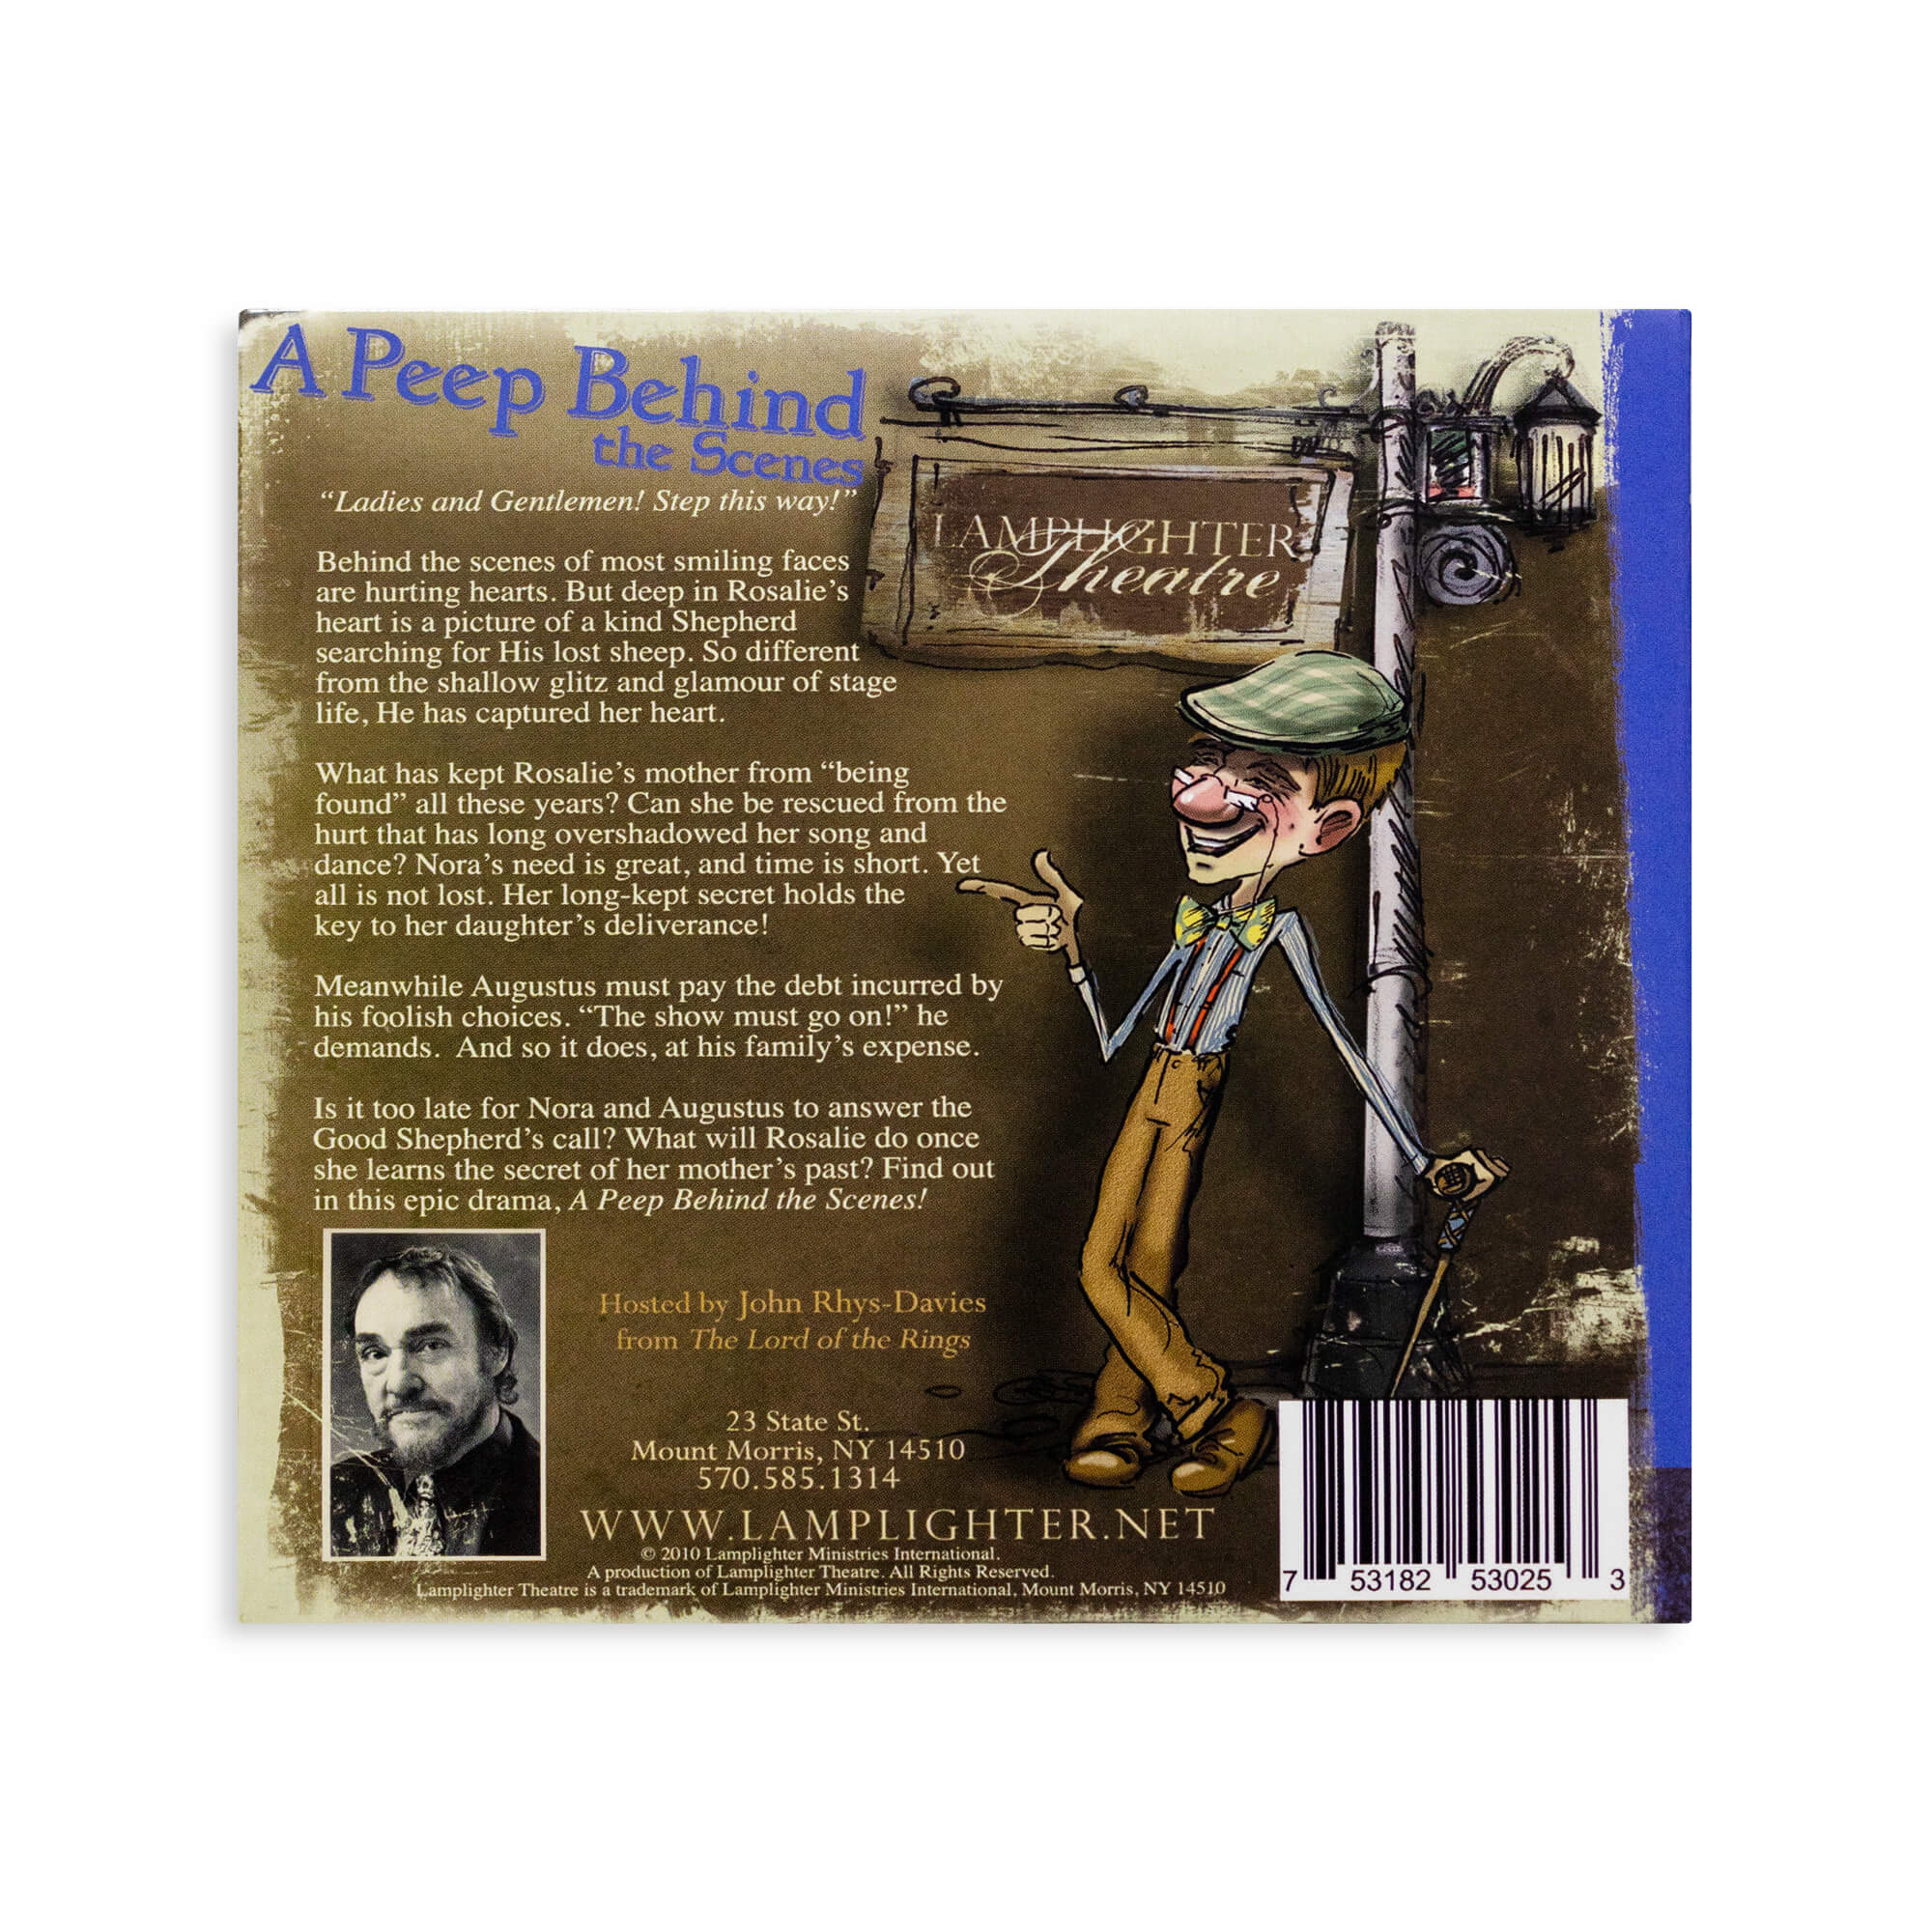 A Peep Behind the Scenes Audio Drama cover